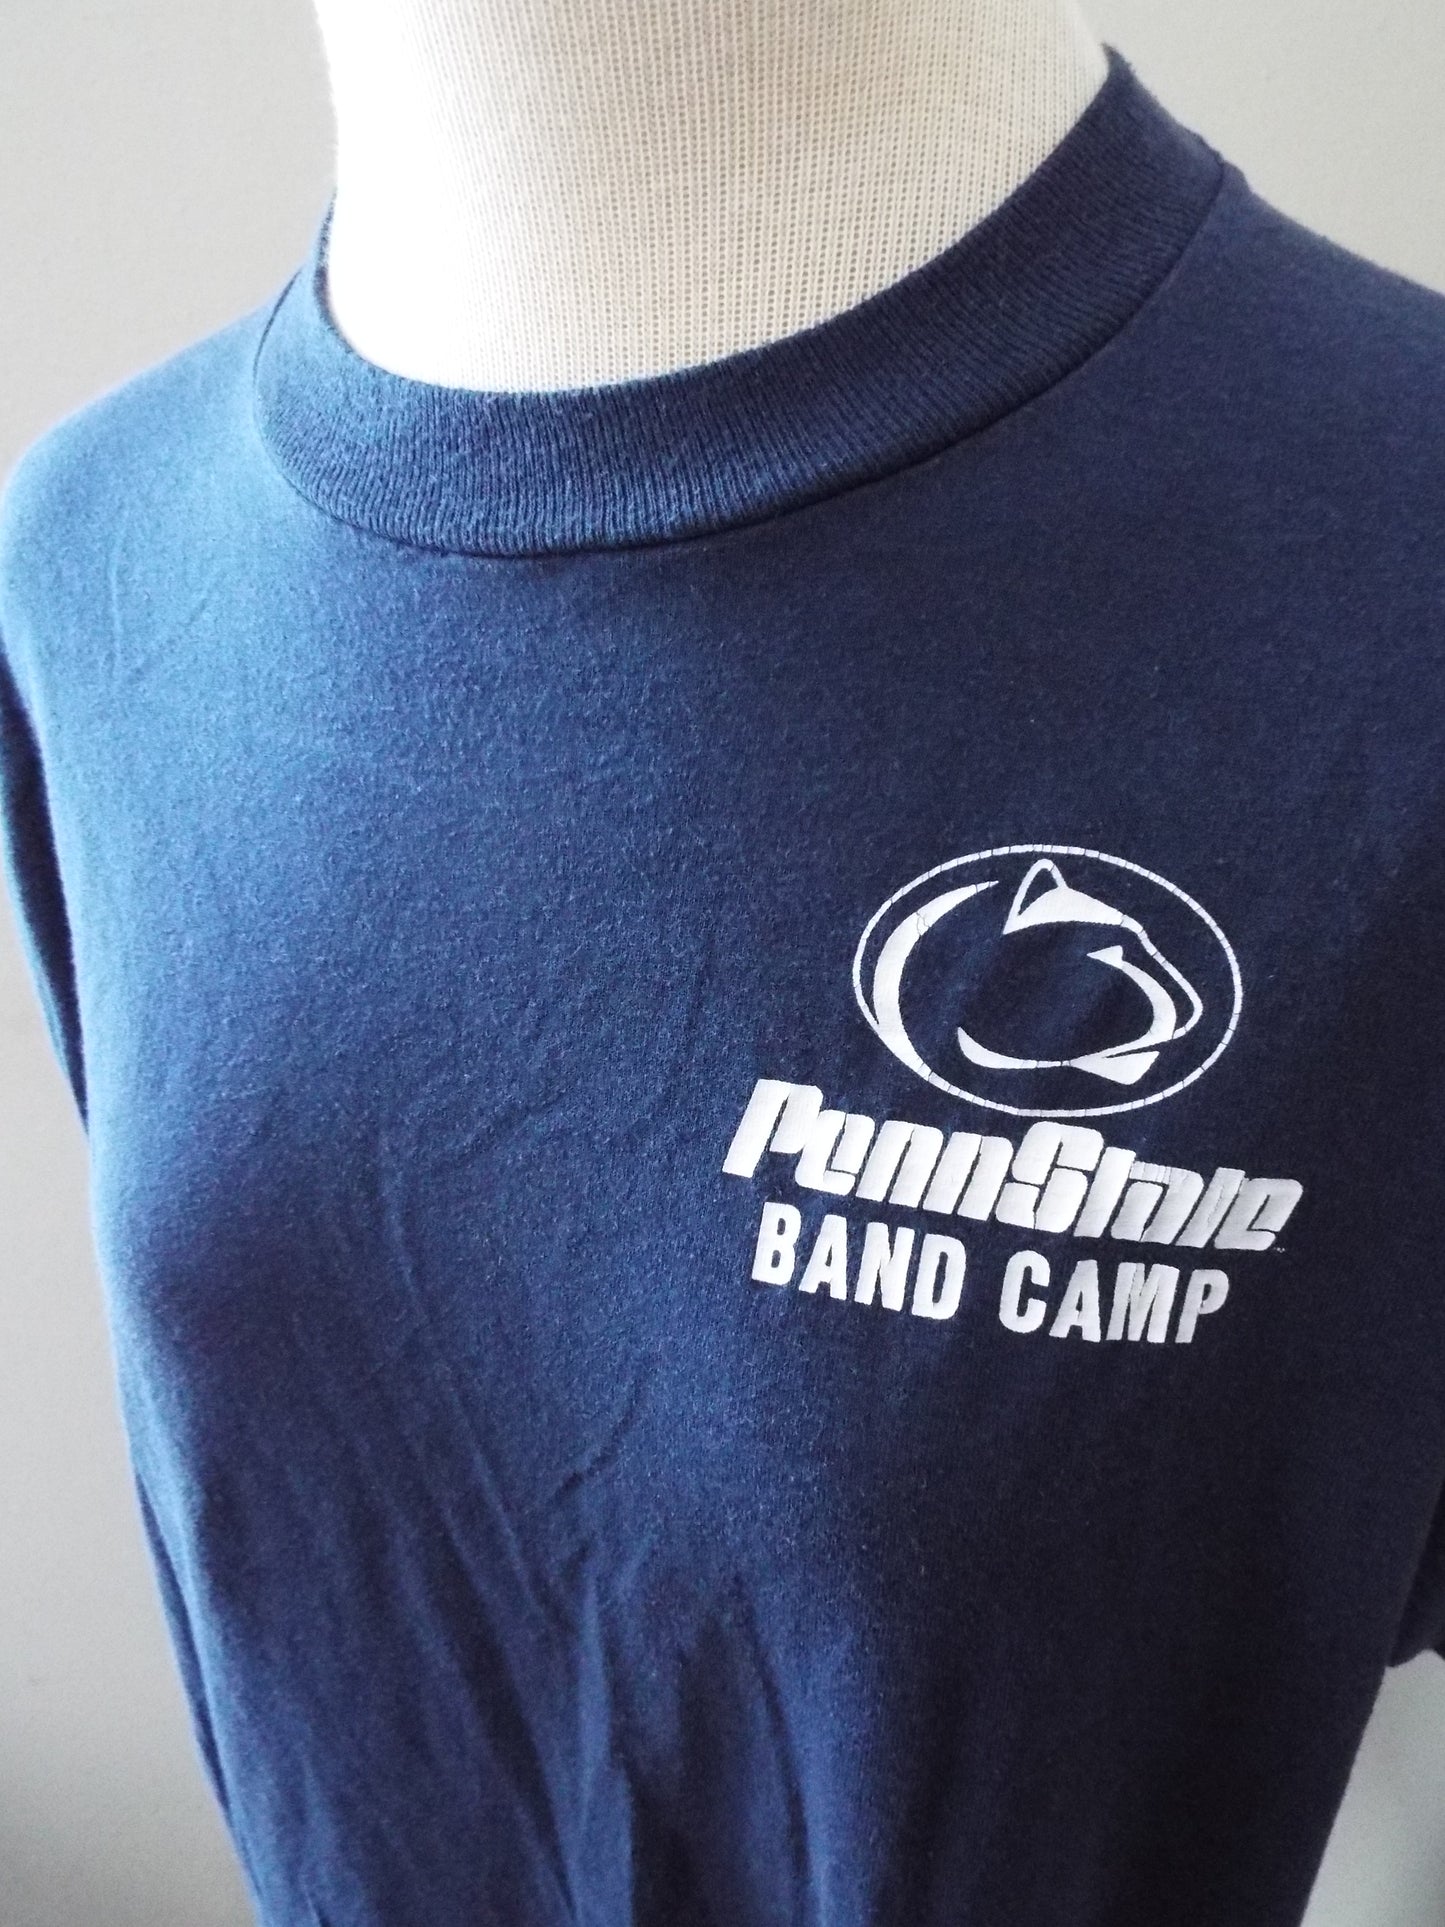 Vintage Penn State Band Camp T Shirt by College Lane